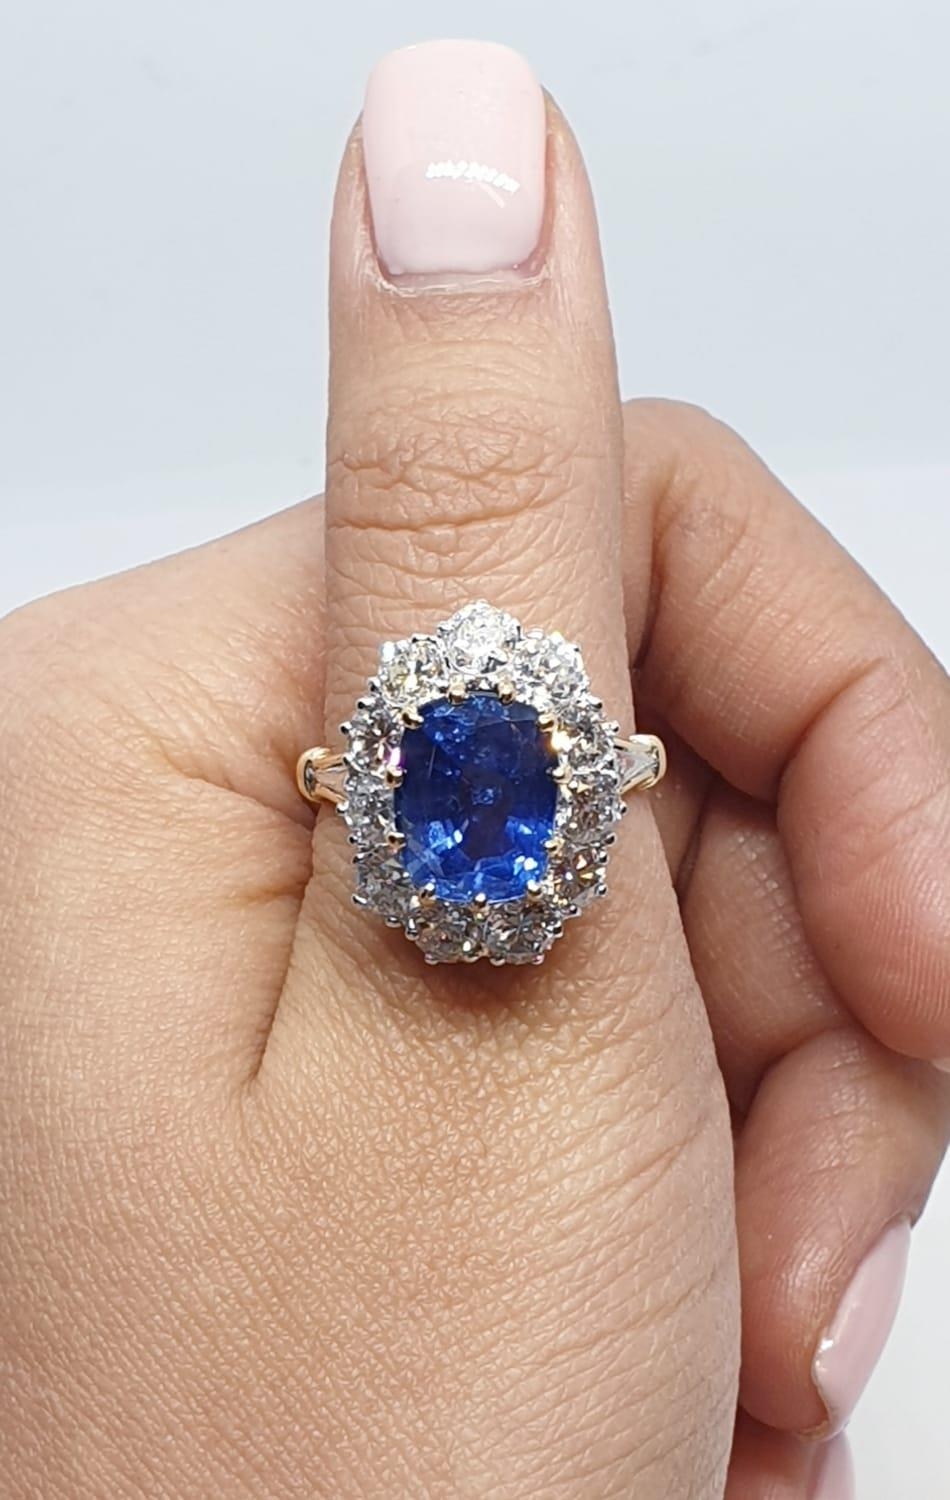 5.75ct sapphire ring set in white and yellow gold with over 3.5ct diamonds surrounding, weight 6. - Image 11 of 12